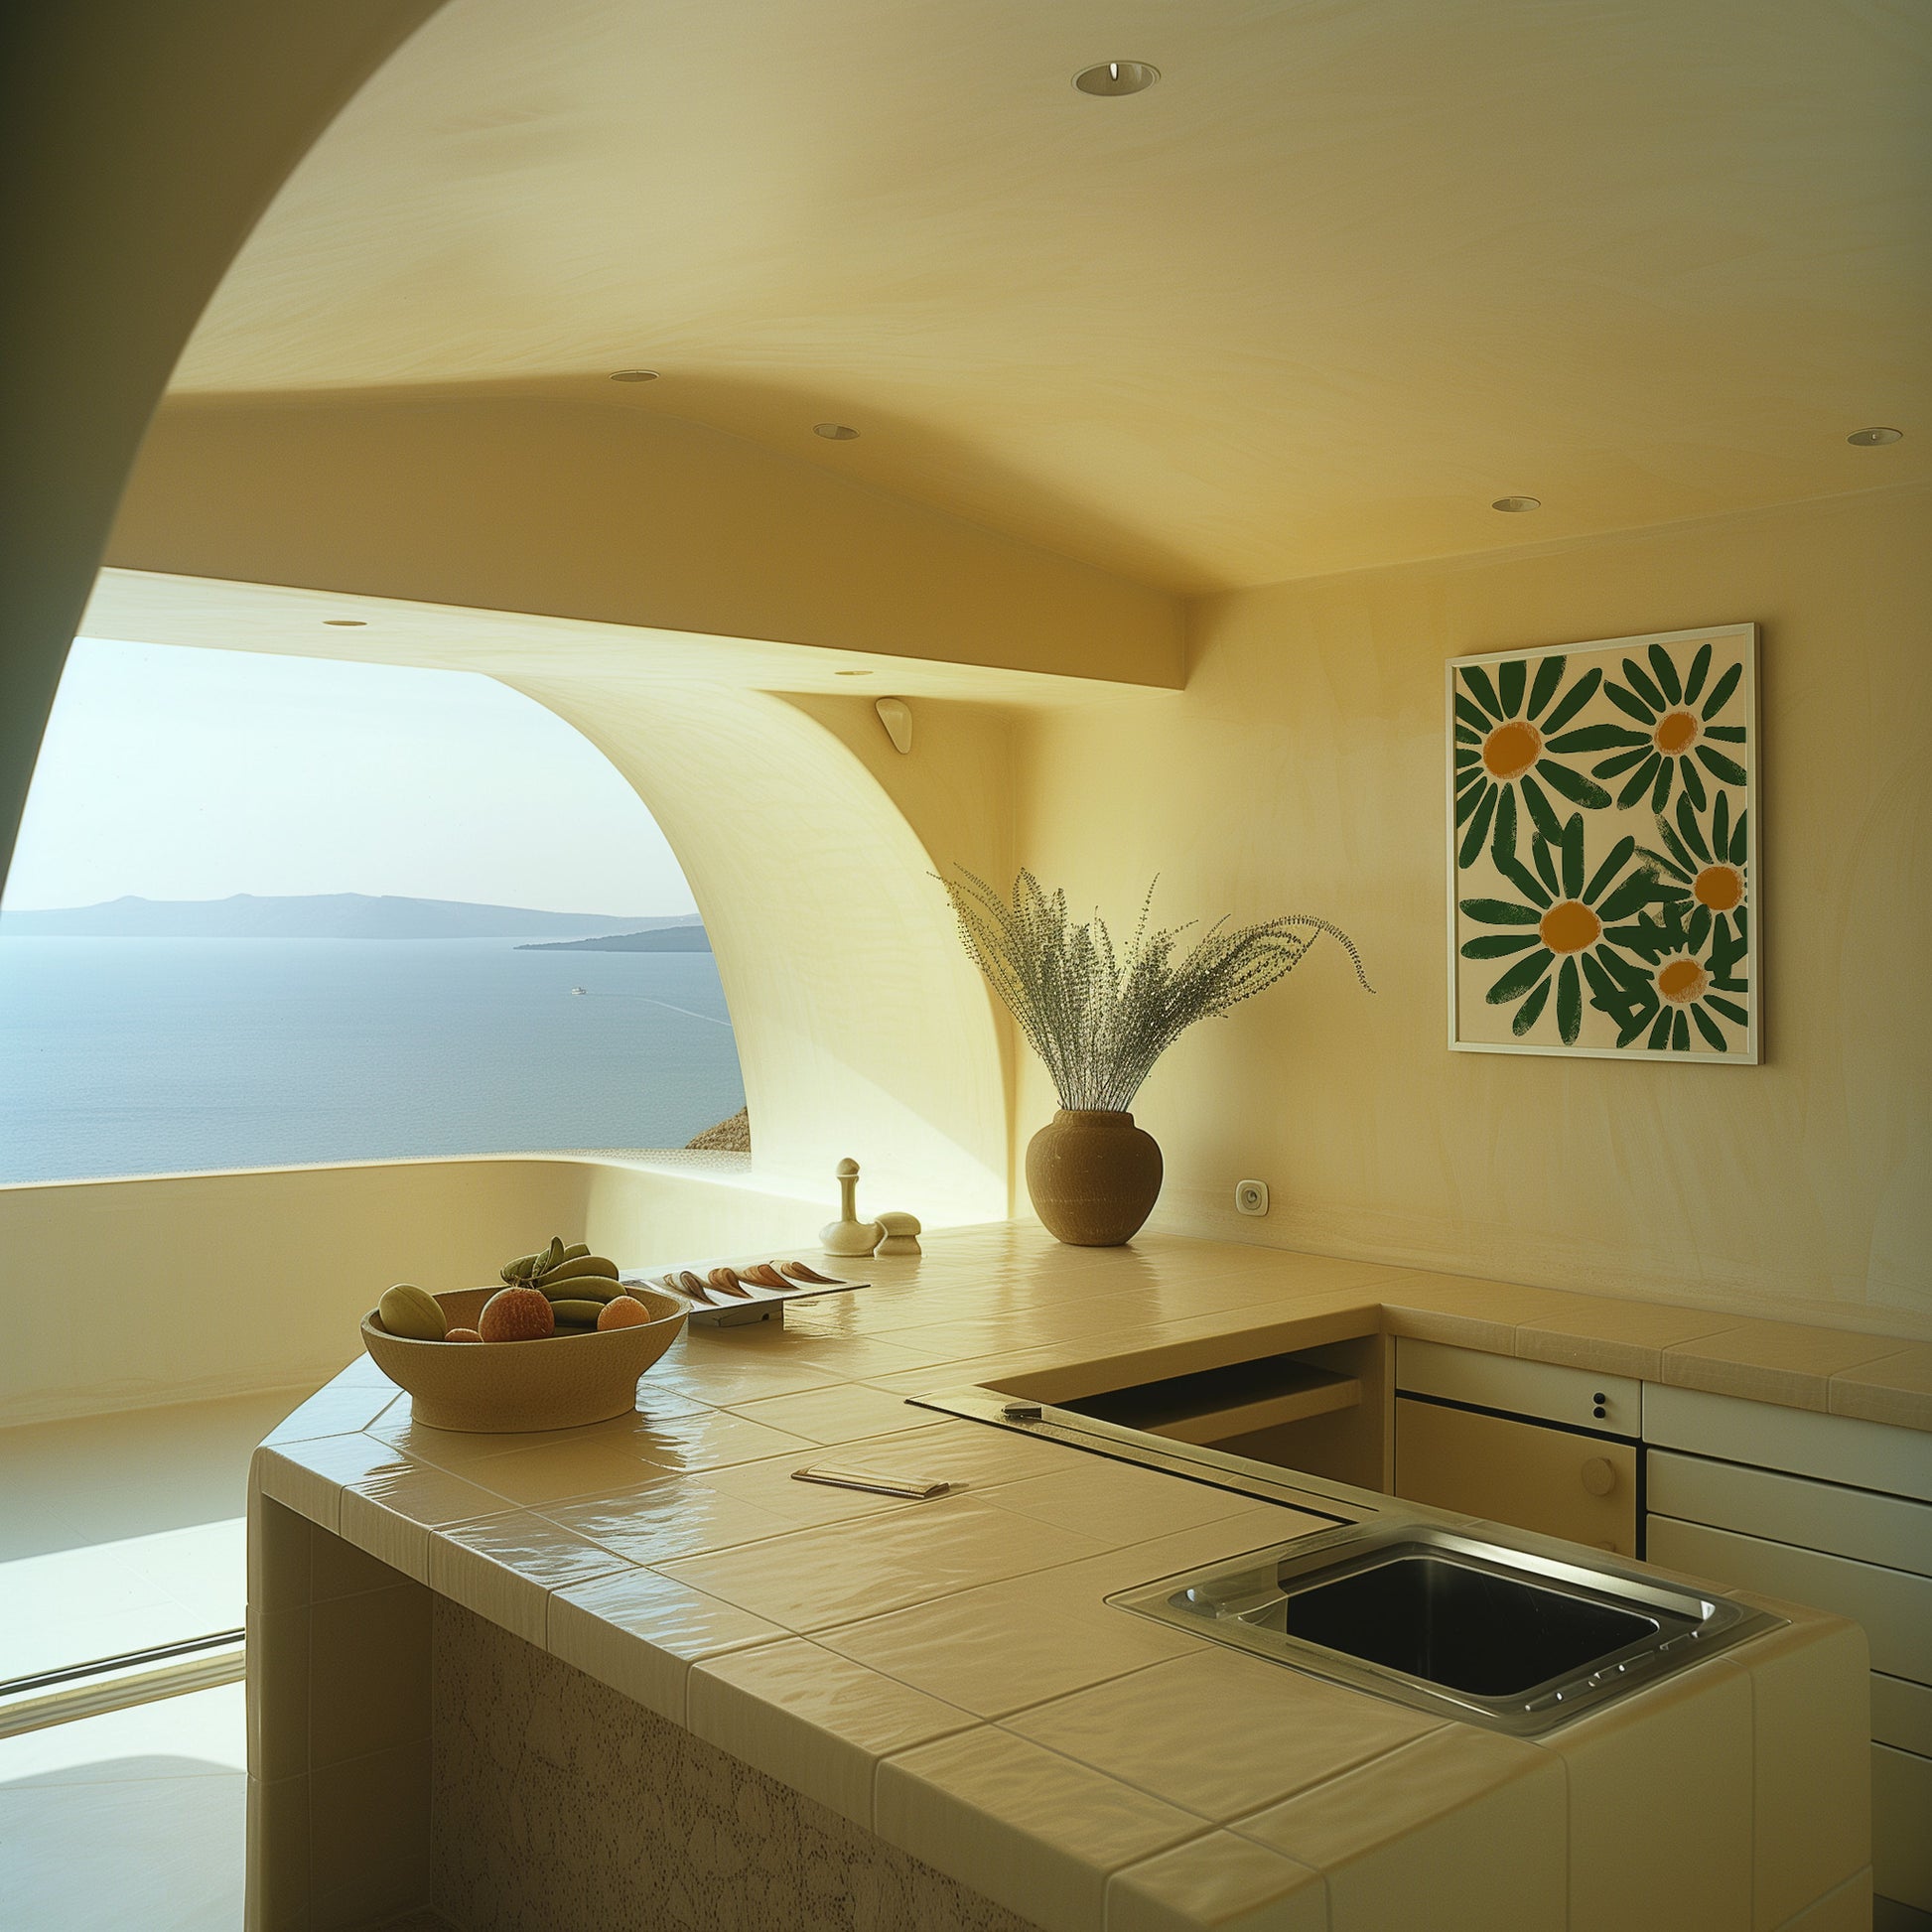 A modern kitchen with a sea view, featuring a curved ceiling and a bowl of fruit on the counter.